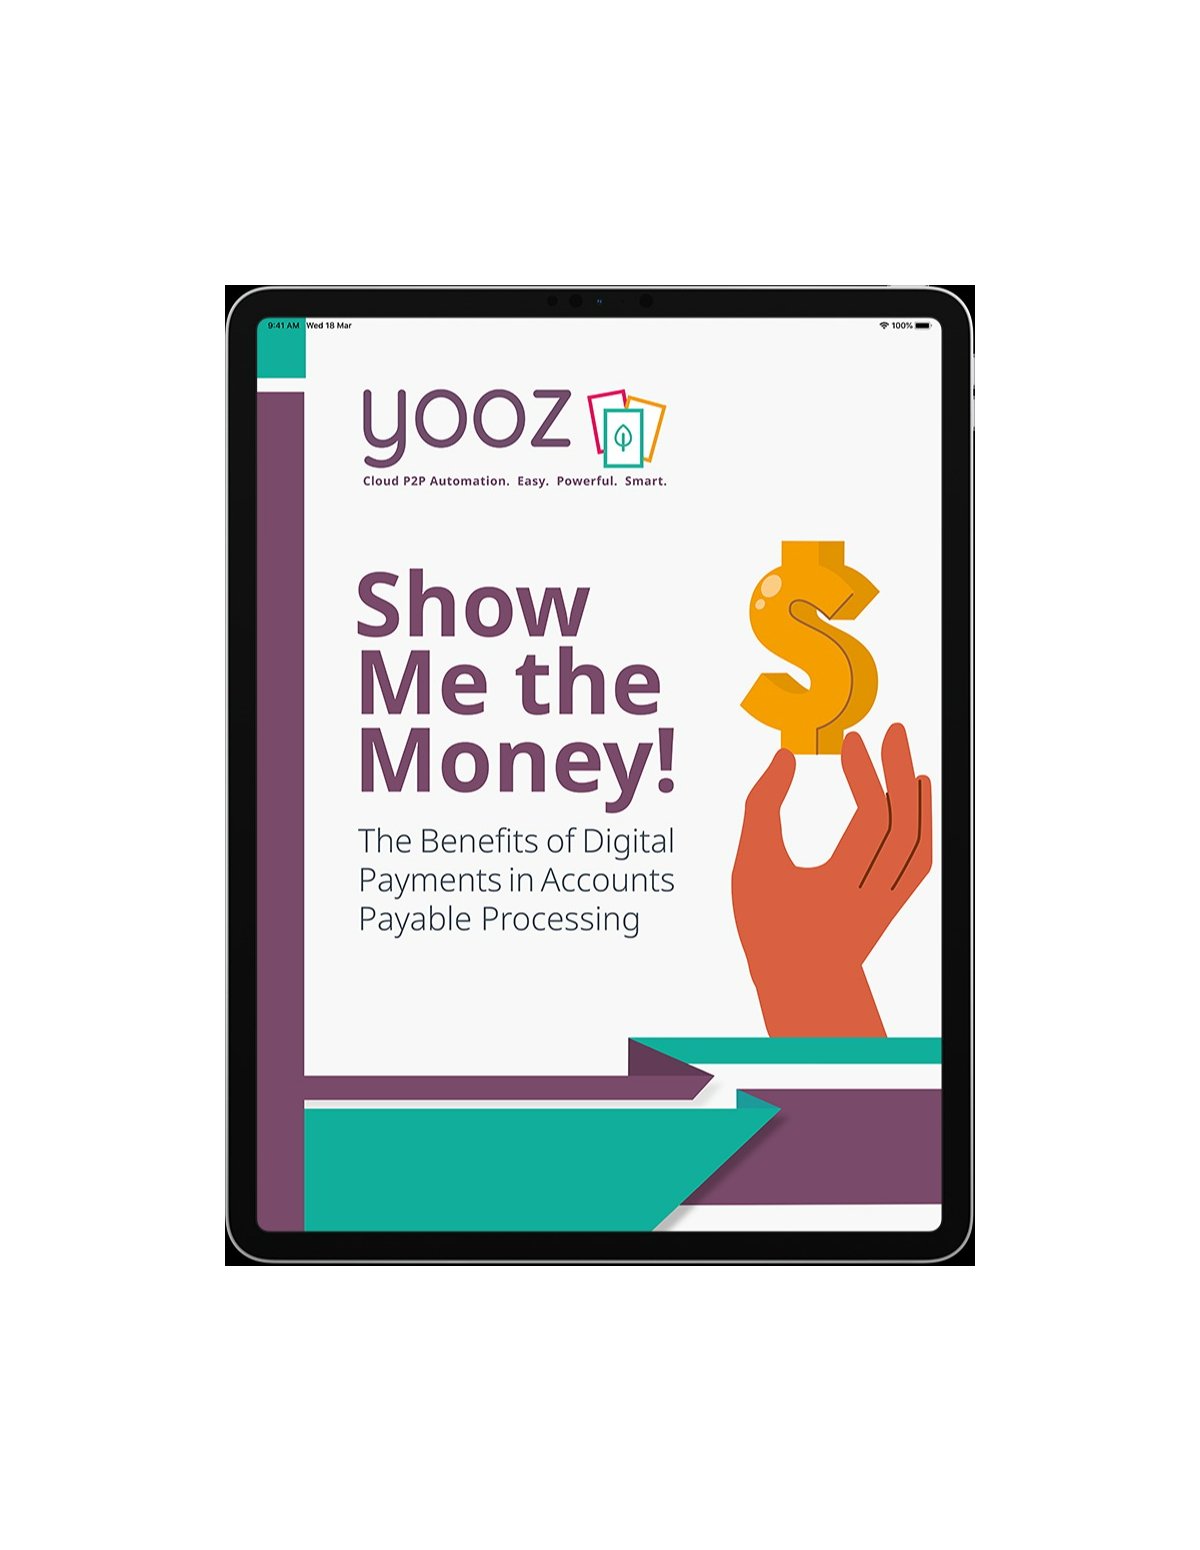 Show me the money! The Benefits to Digital Payments in Accounts Payable Processing